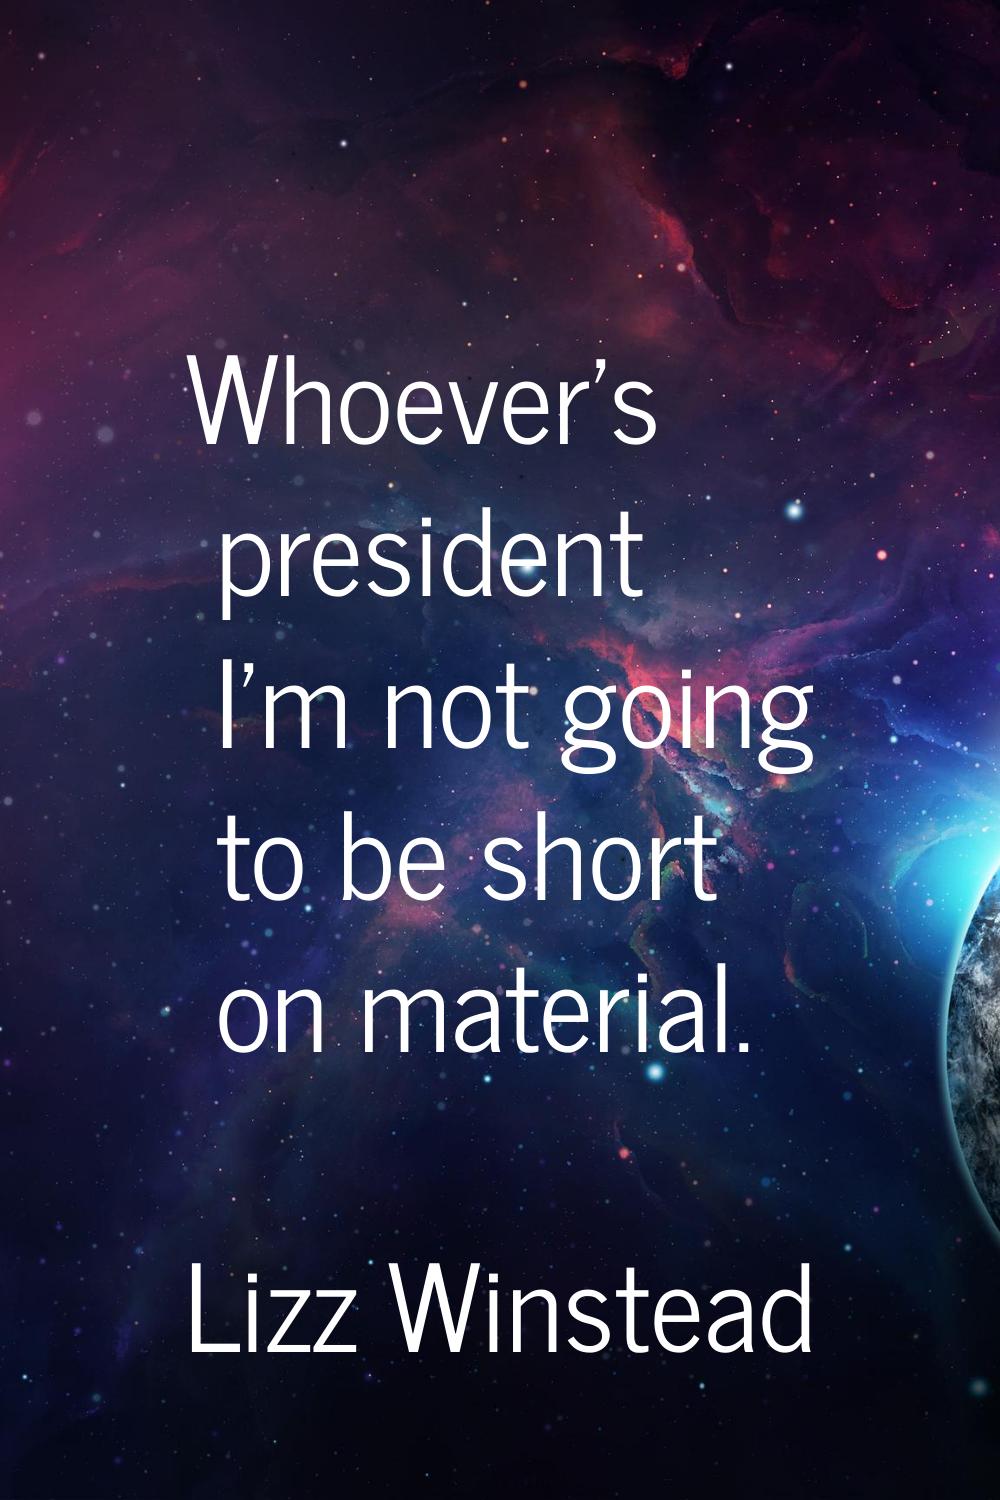 Whoever's president I'm not going to be short on material.